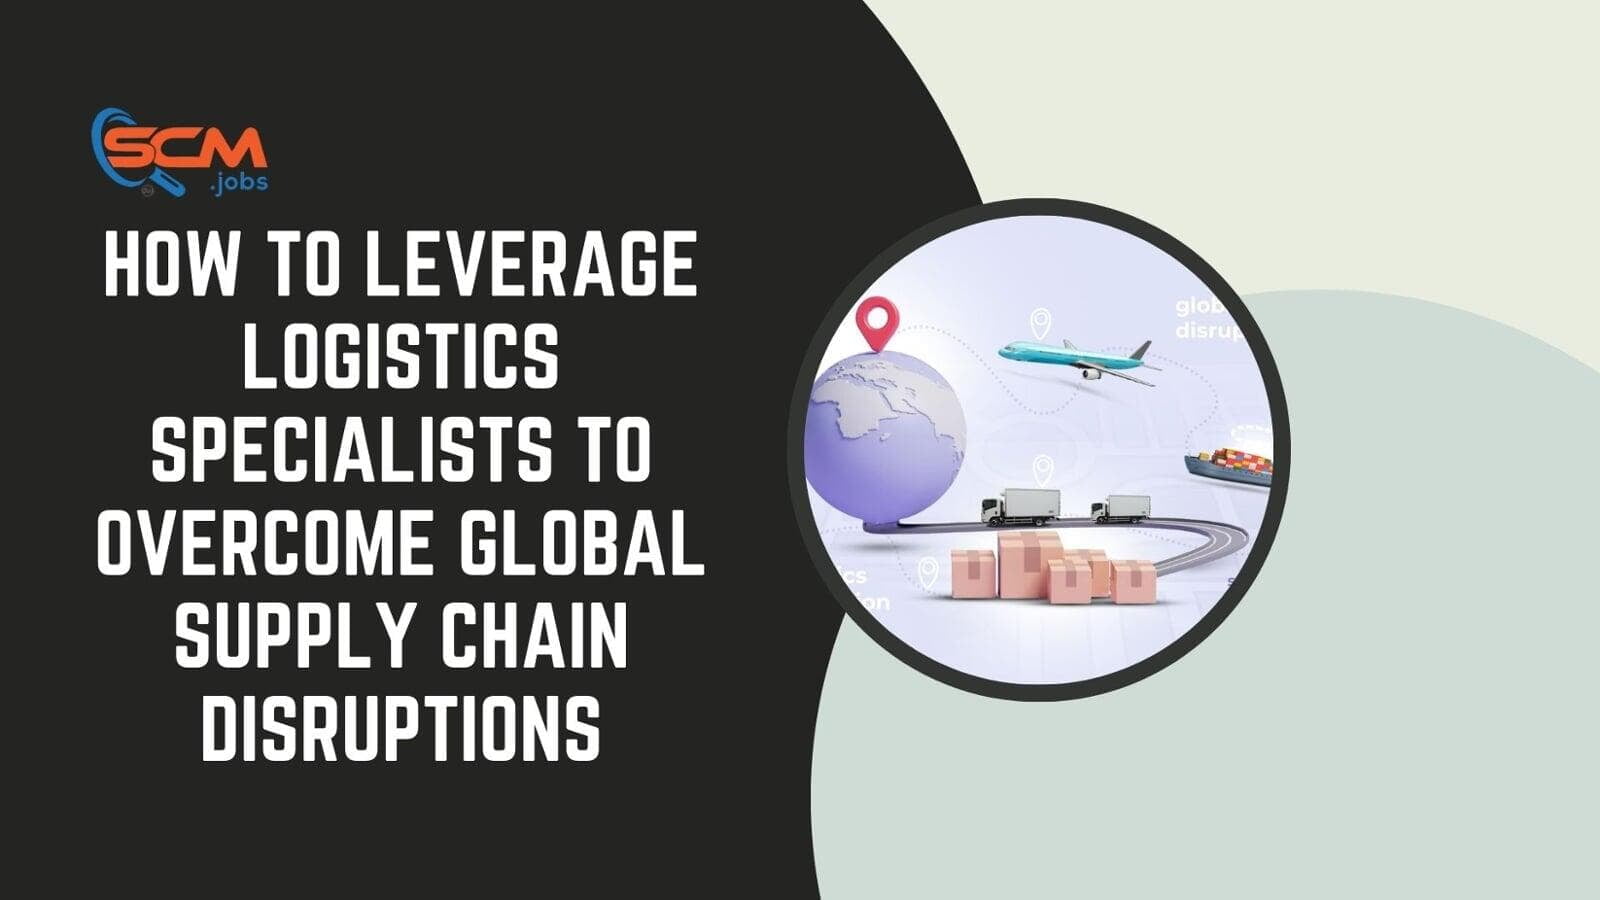 How to Leverage Logistics Specialists to Overcome Global Supply Chain Disruptions